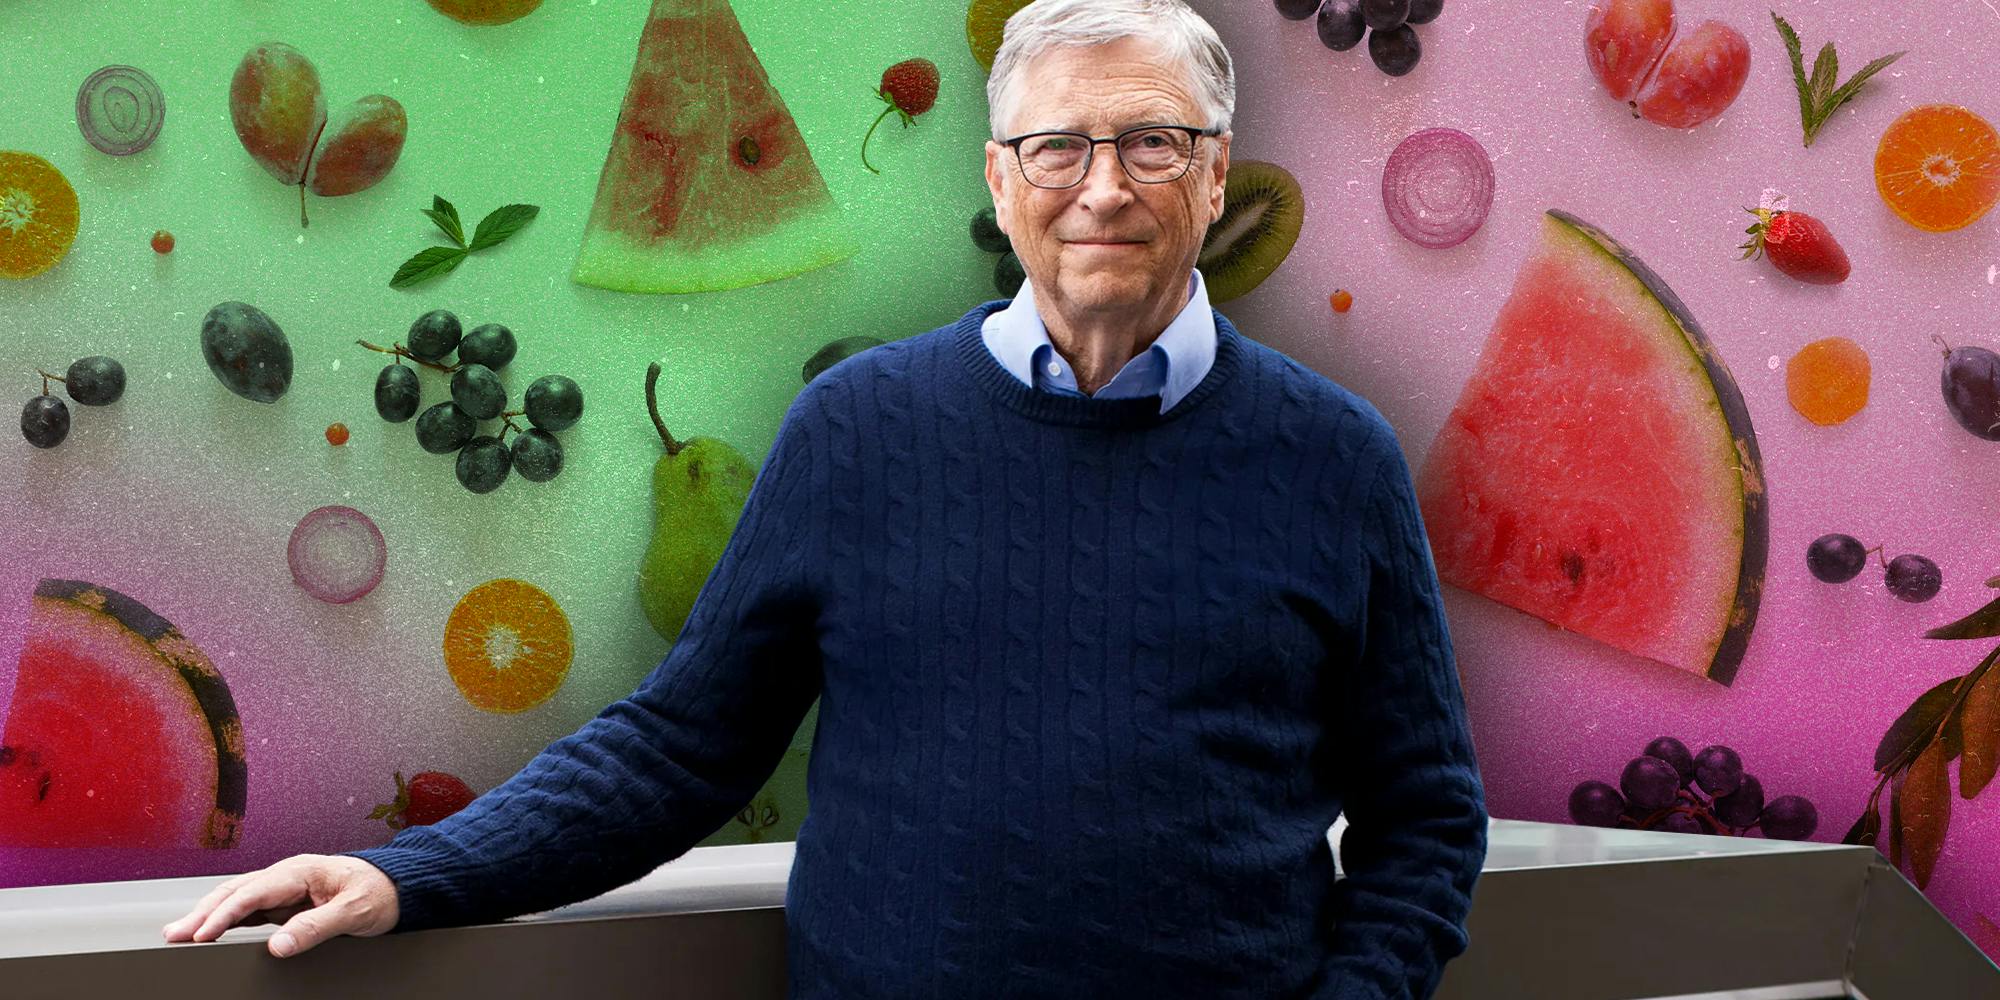 Conspiracy theorists think Bill Gates has made their fruit rubbery